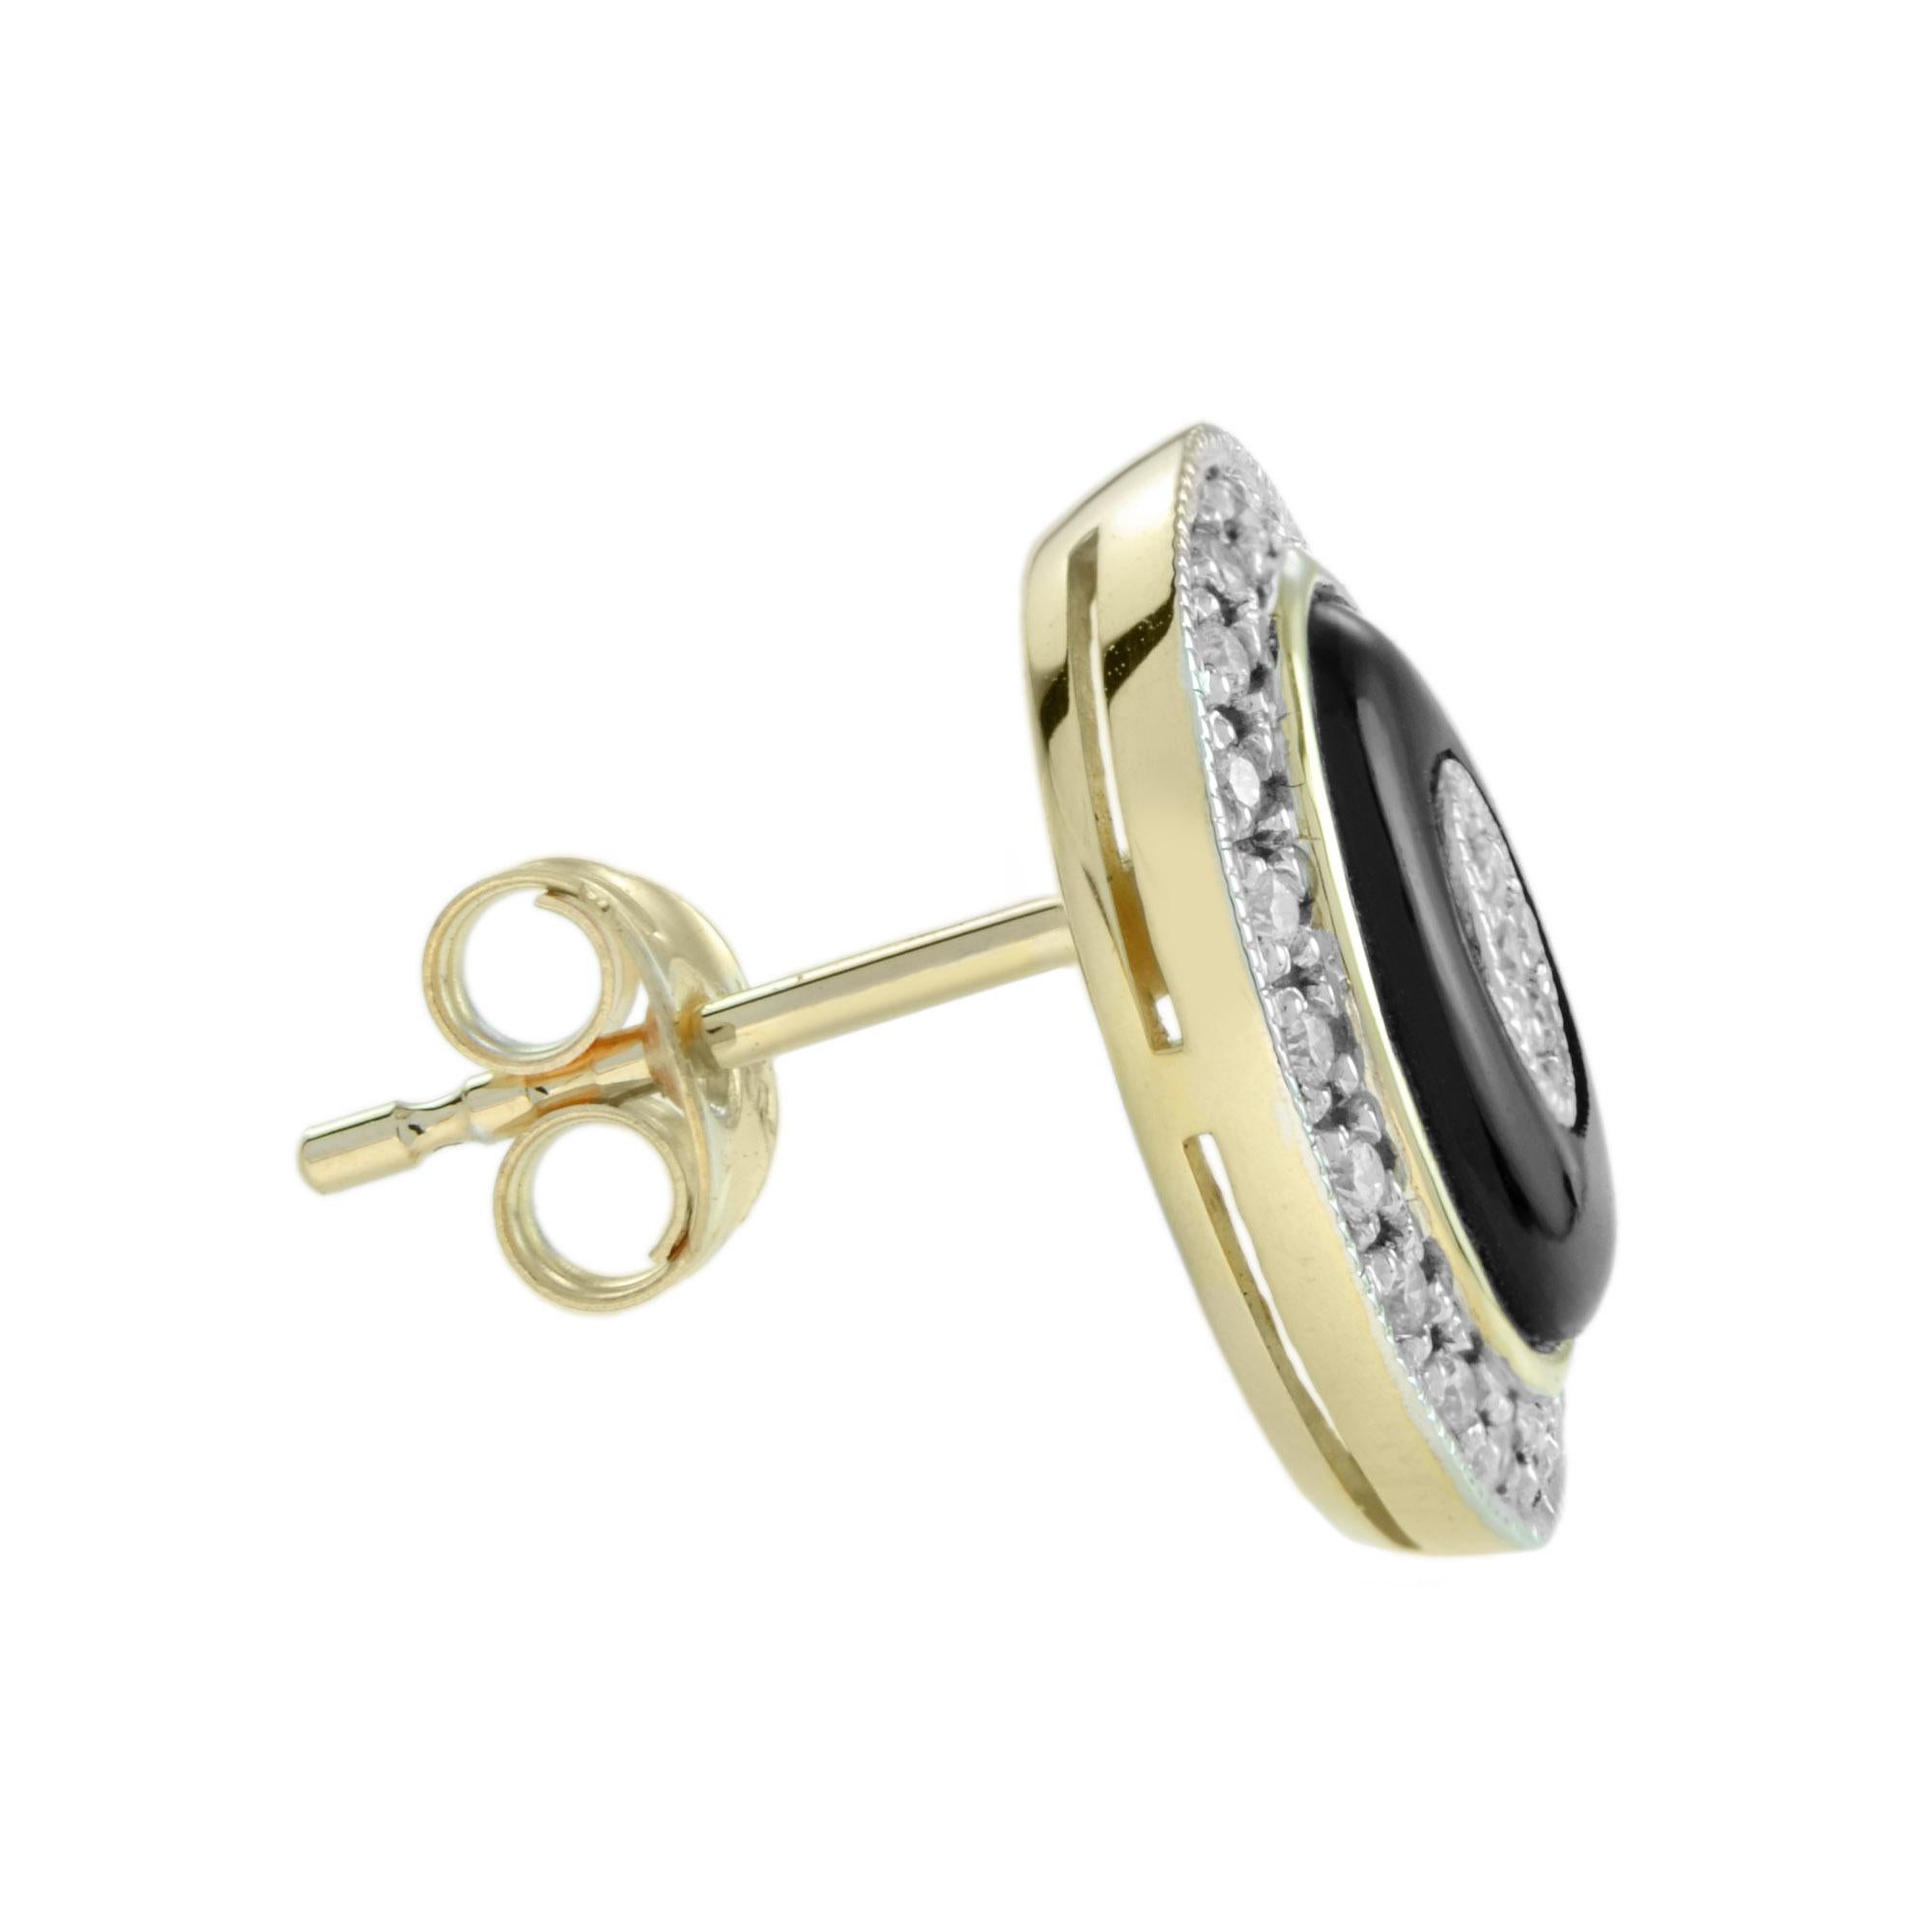 This beautiful pair of unique stud earrings feature an oval cut black onyx inlaid and set with diamond cluster and surrounded by a diamond halo. These earrings are crafted in 18k yellow gold and finished with milgrain edging. These art deco inspired